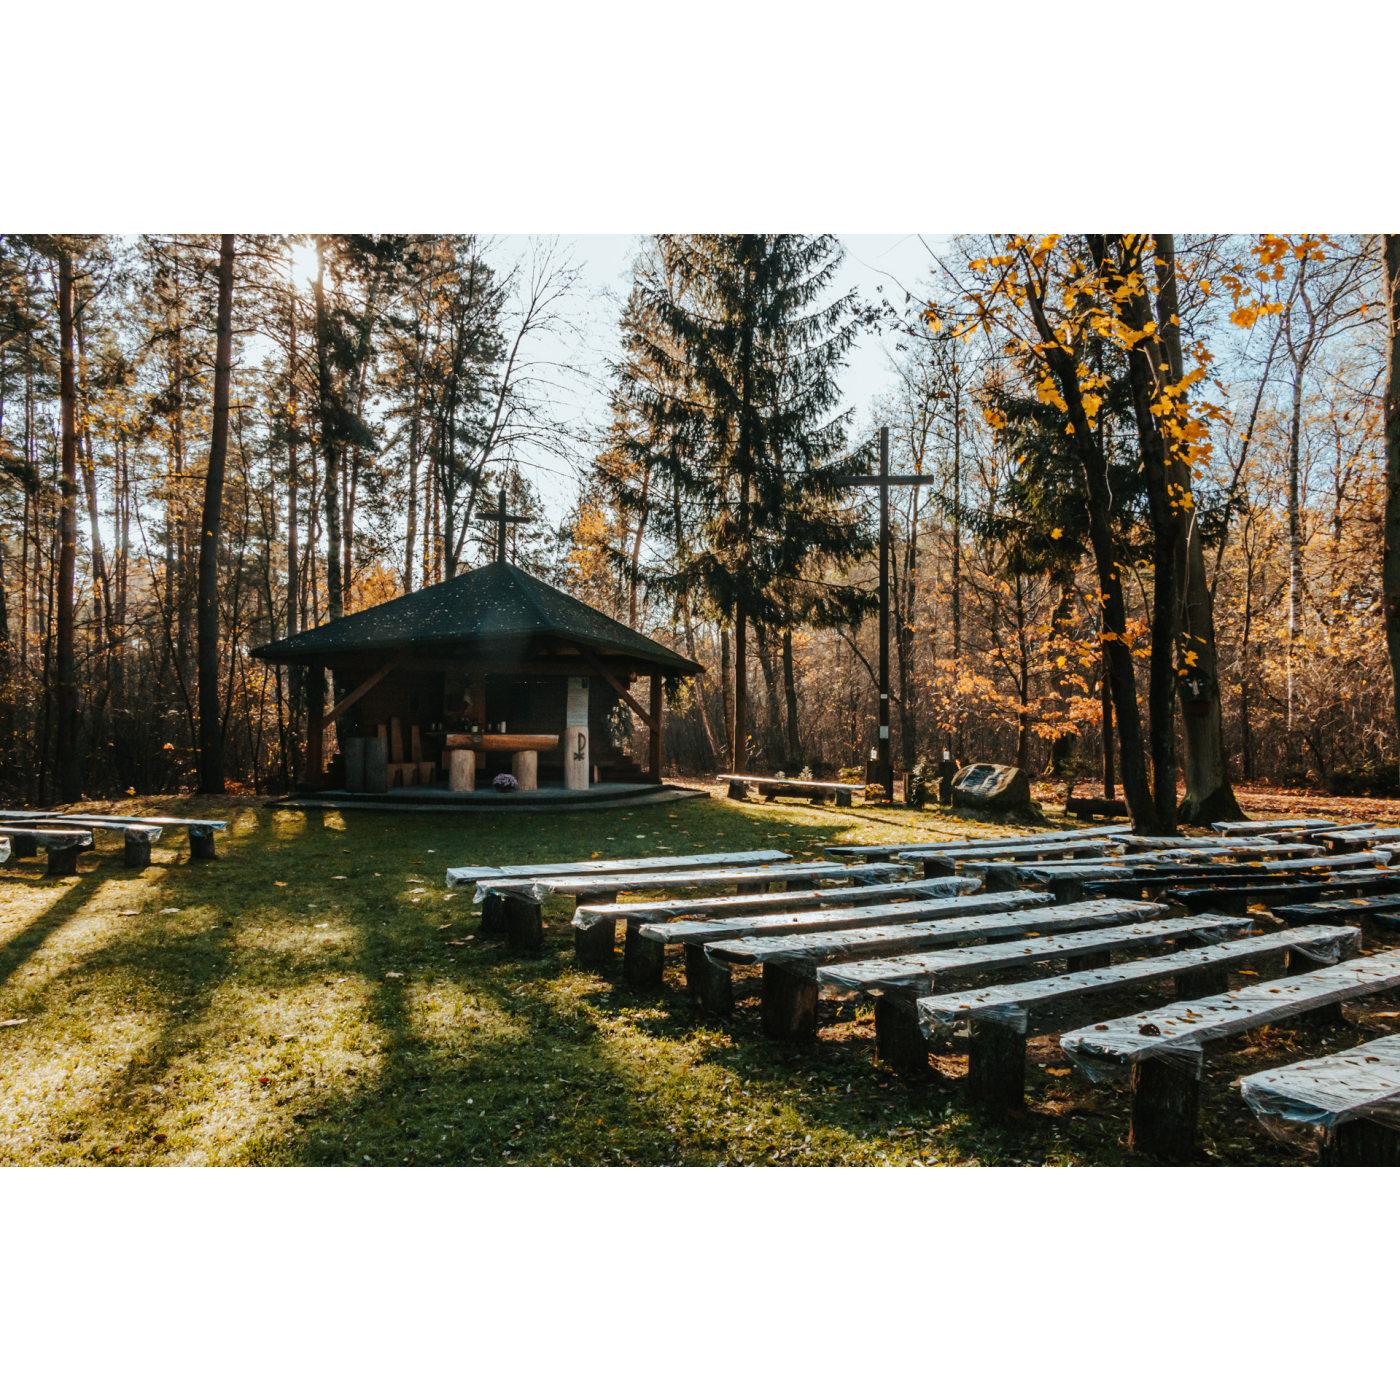 A small chapel made of wooden logs surrounded by autumn trees, wooden benches for the faithful in front, and a large wooden cross in the background